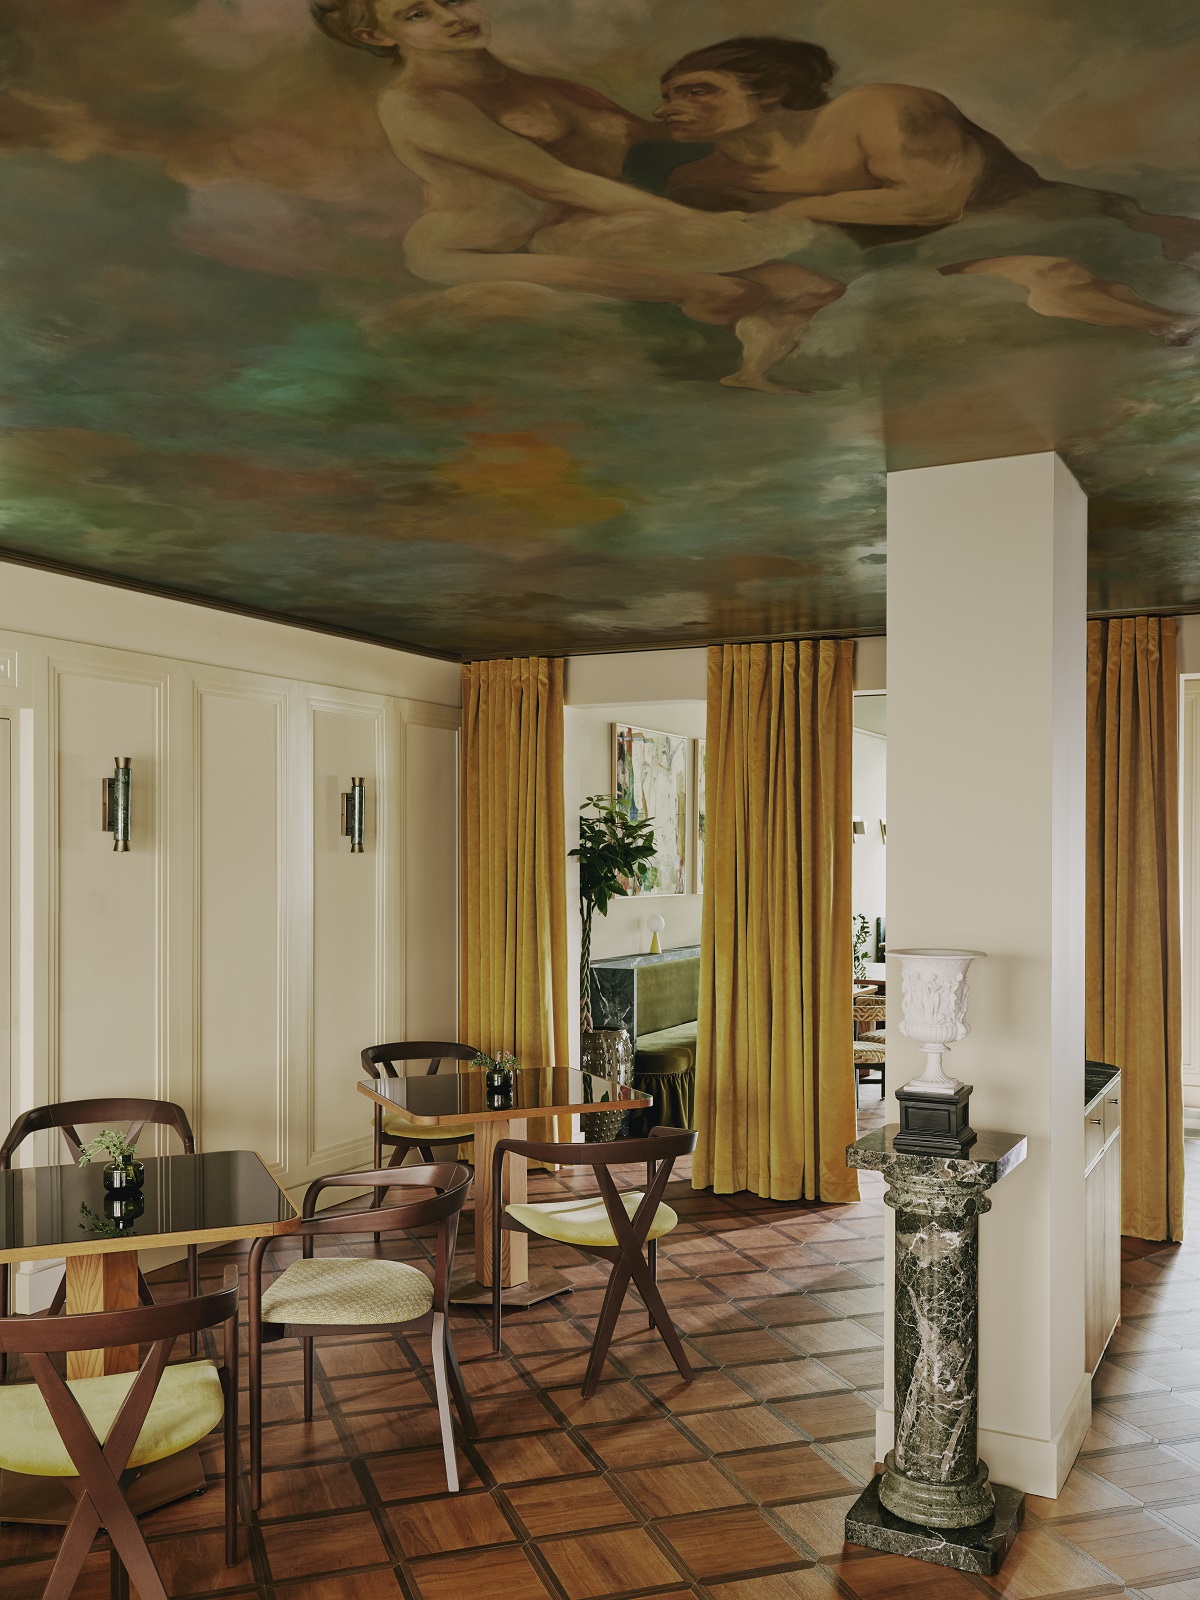 ceiling with a fresco mustard curtains dividing spaces and dining tables